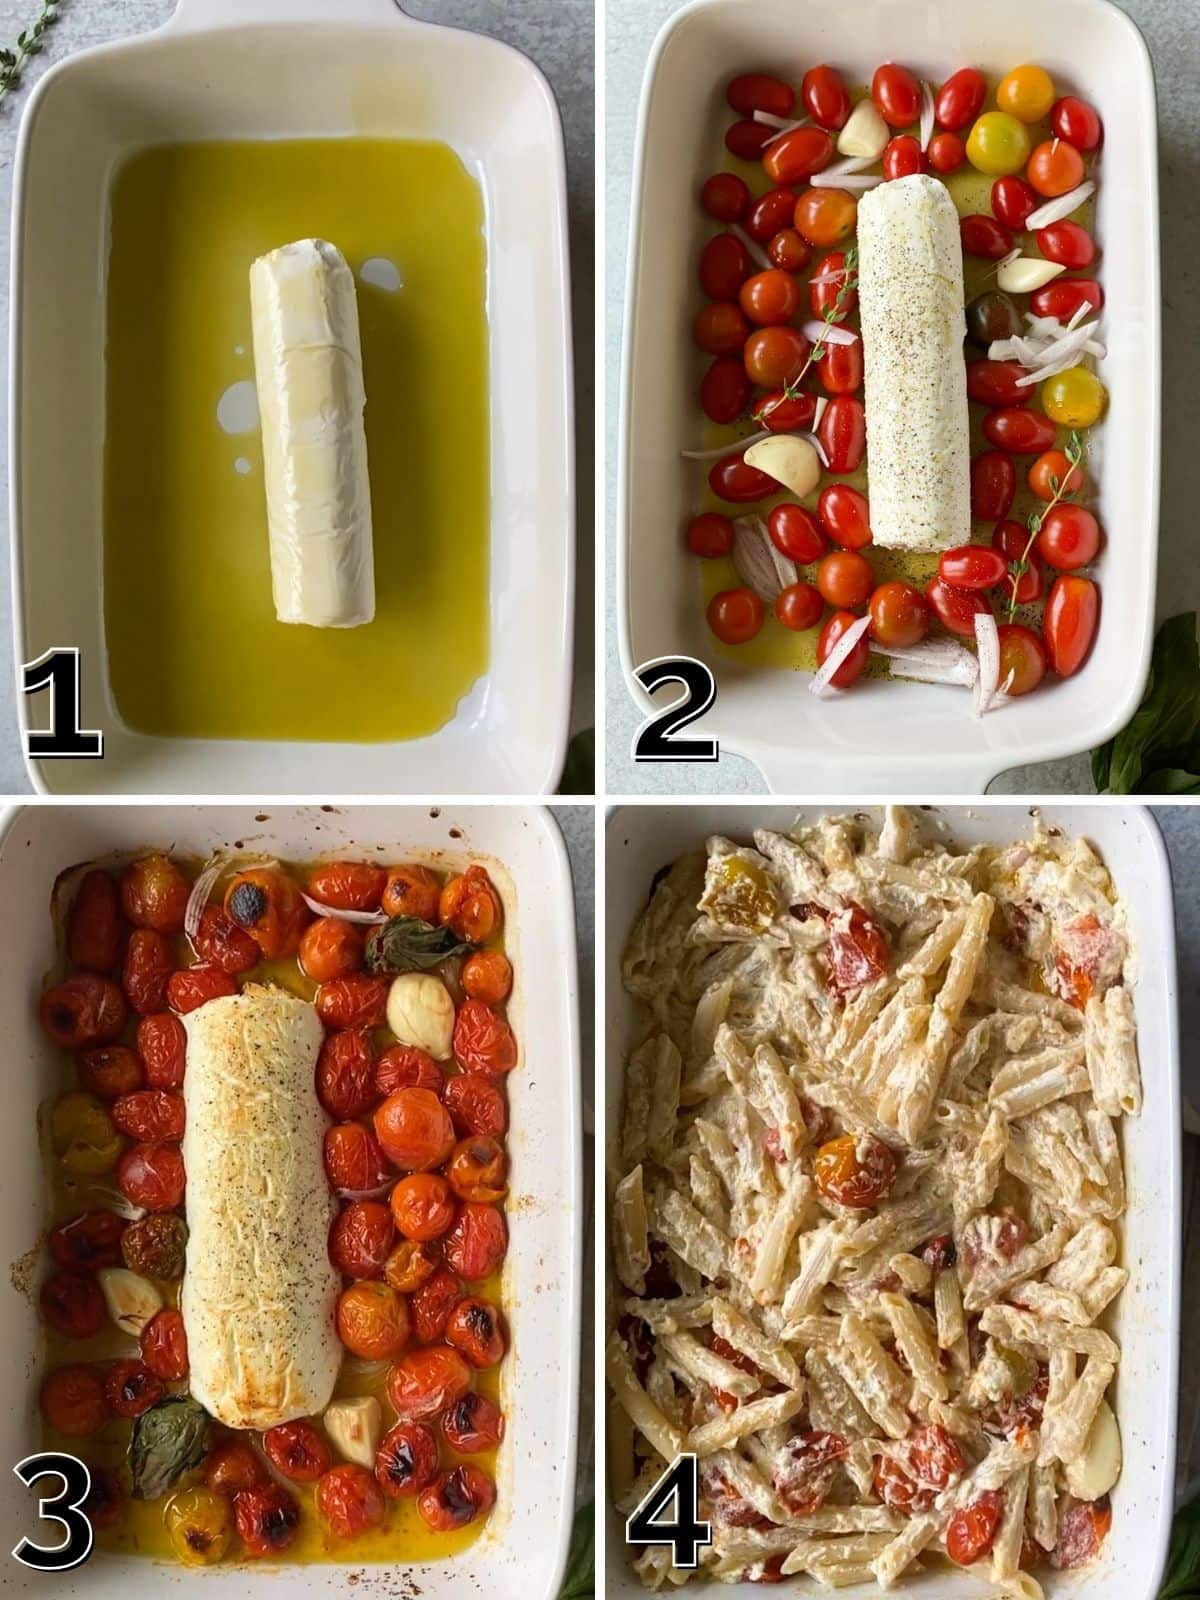 A step by step process for baking goat cheese and tomatoes, then mixing with cooked pasta.